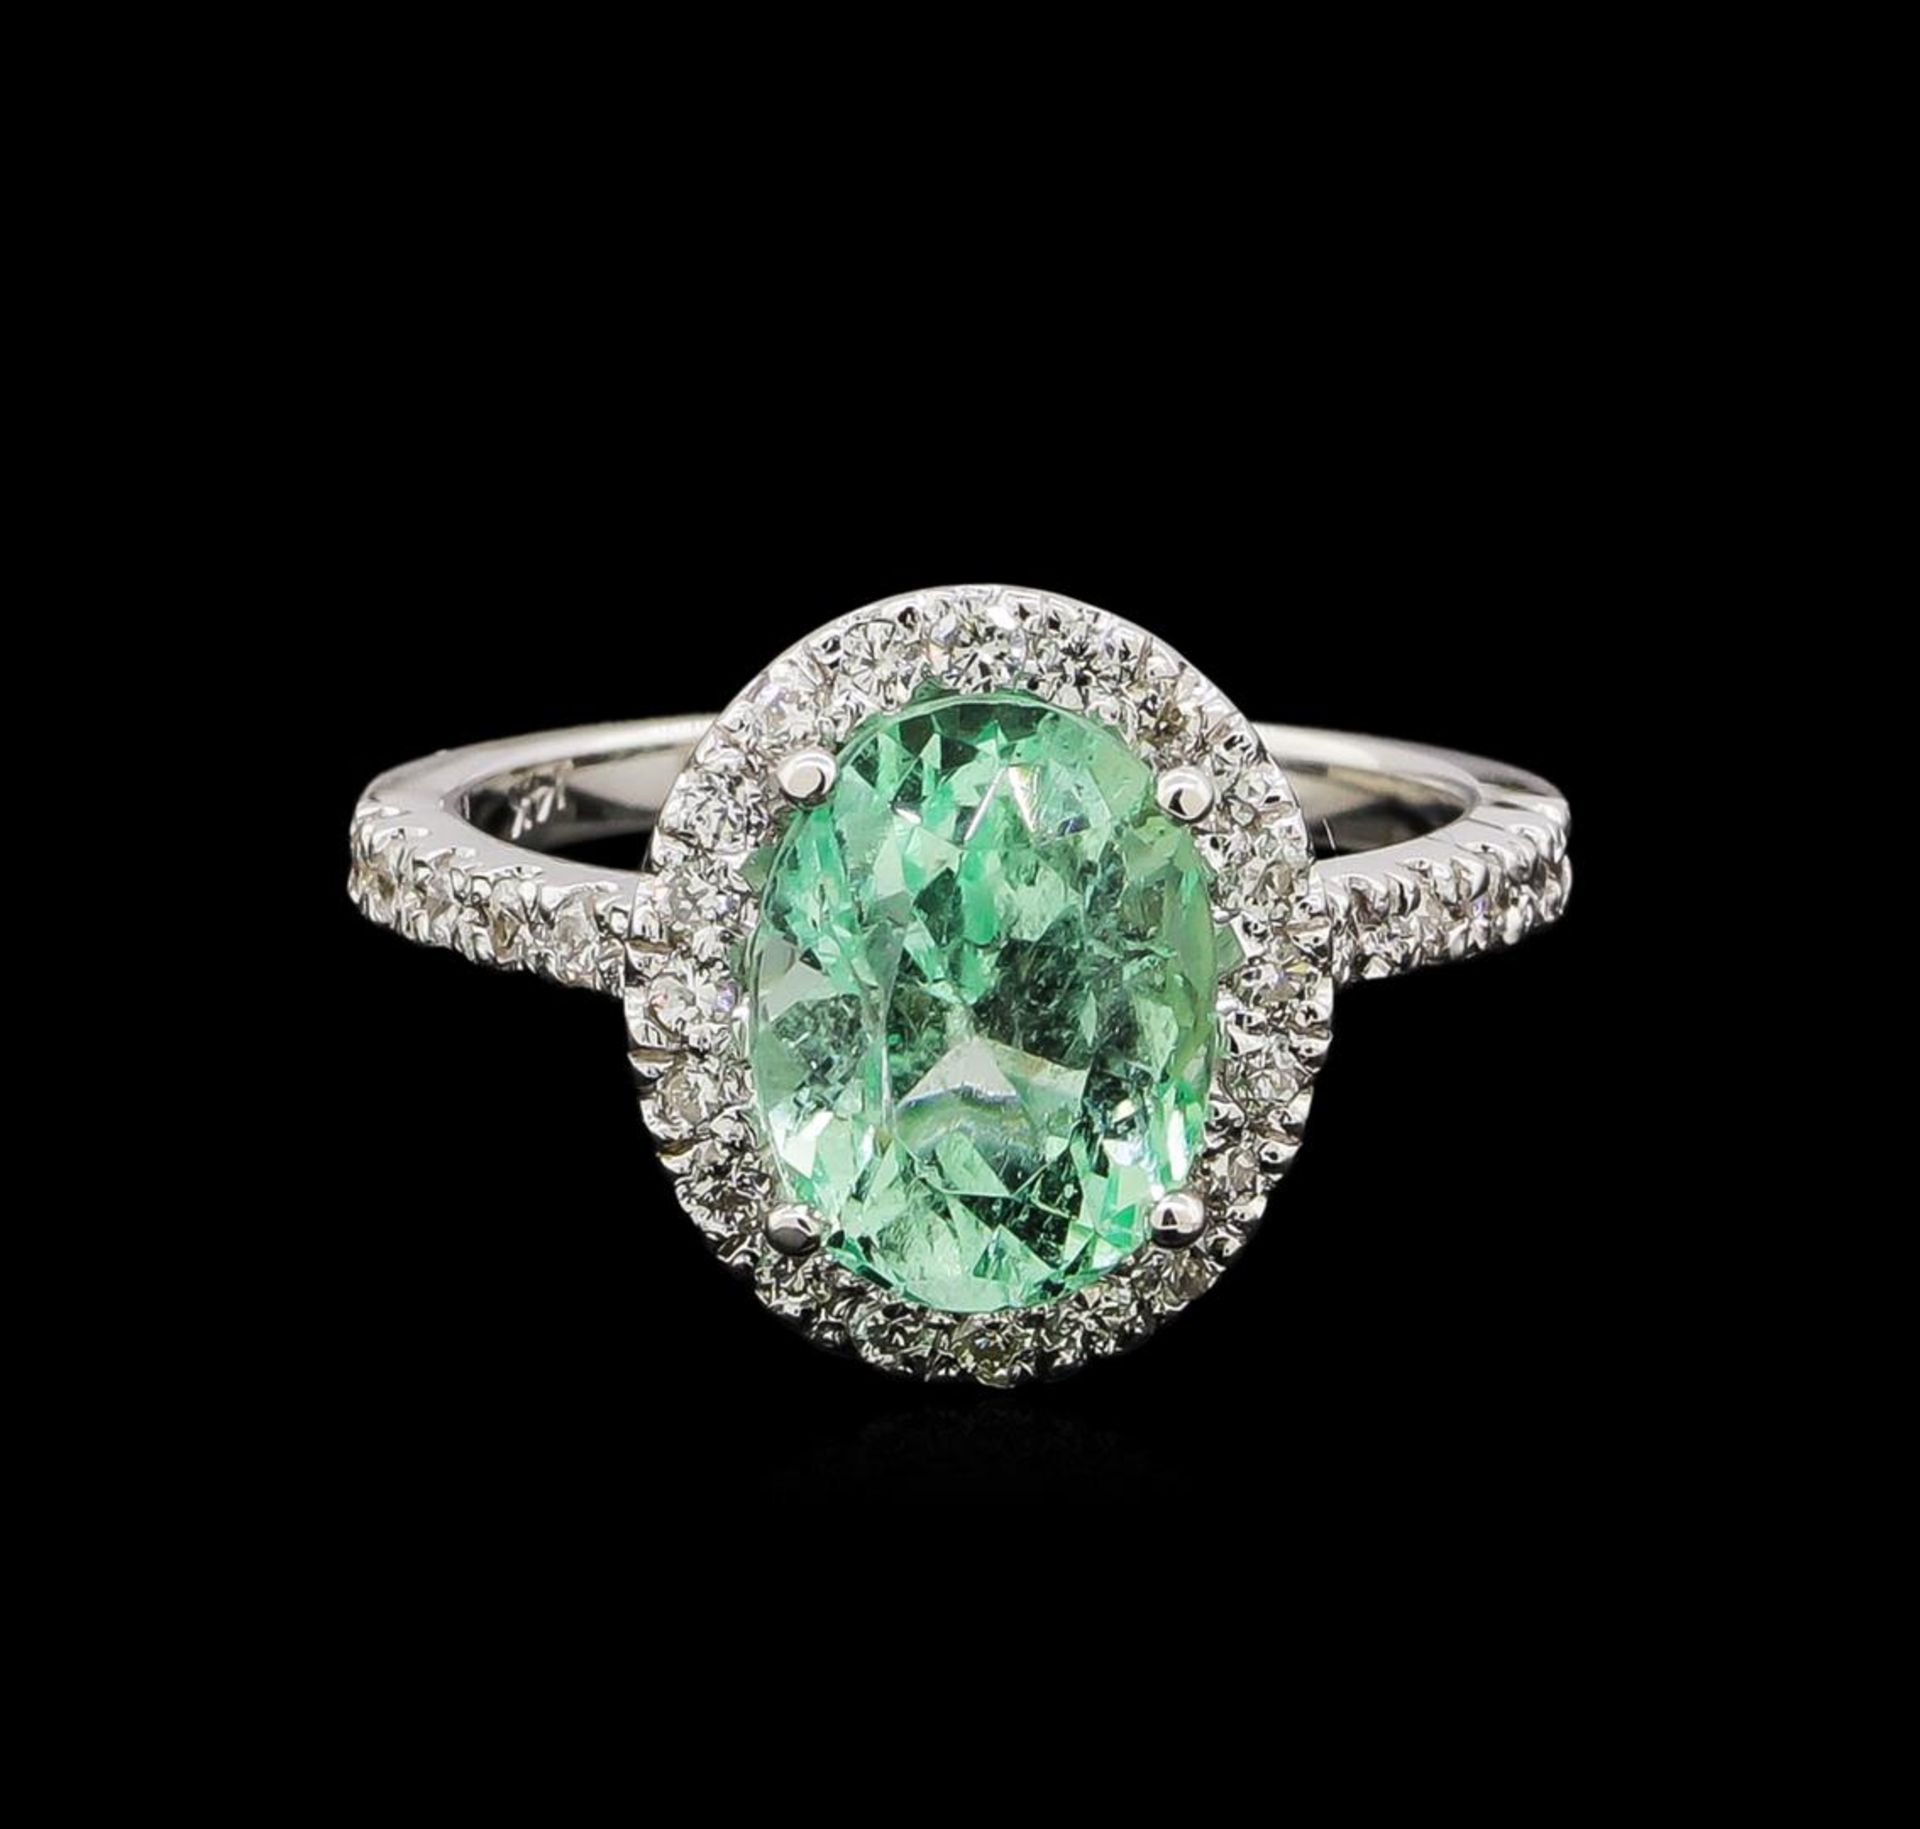 2.75 ctw Emerald and Diamond Ring - 14KT White Gold - Image 2 of 5